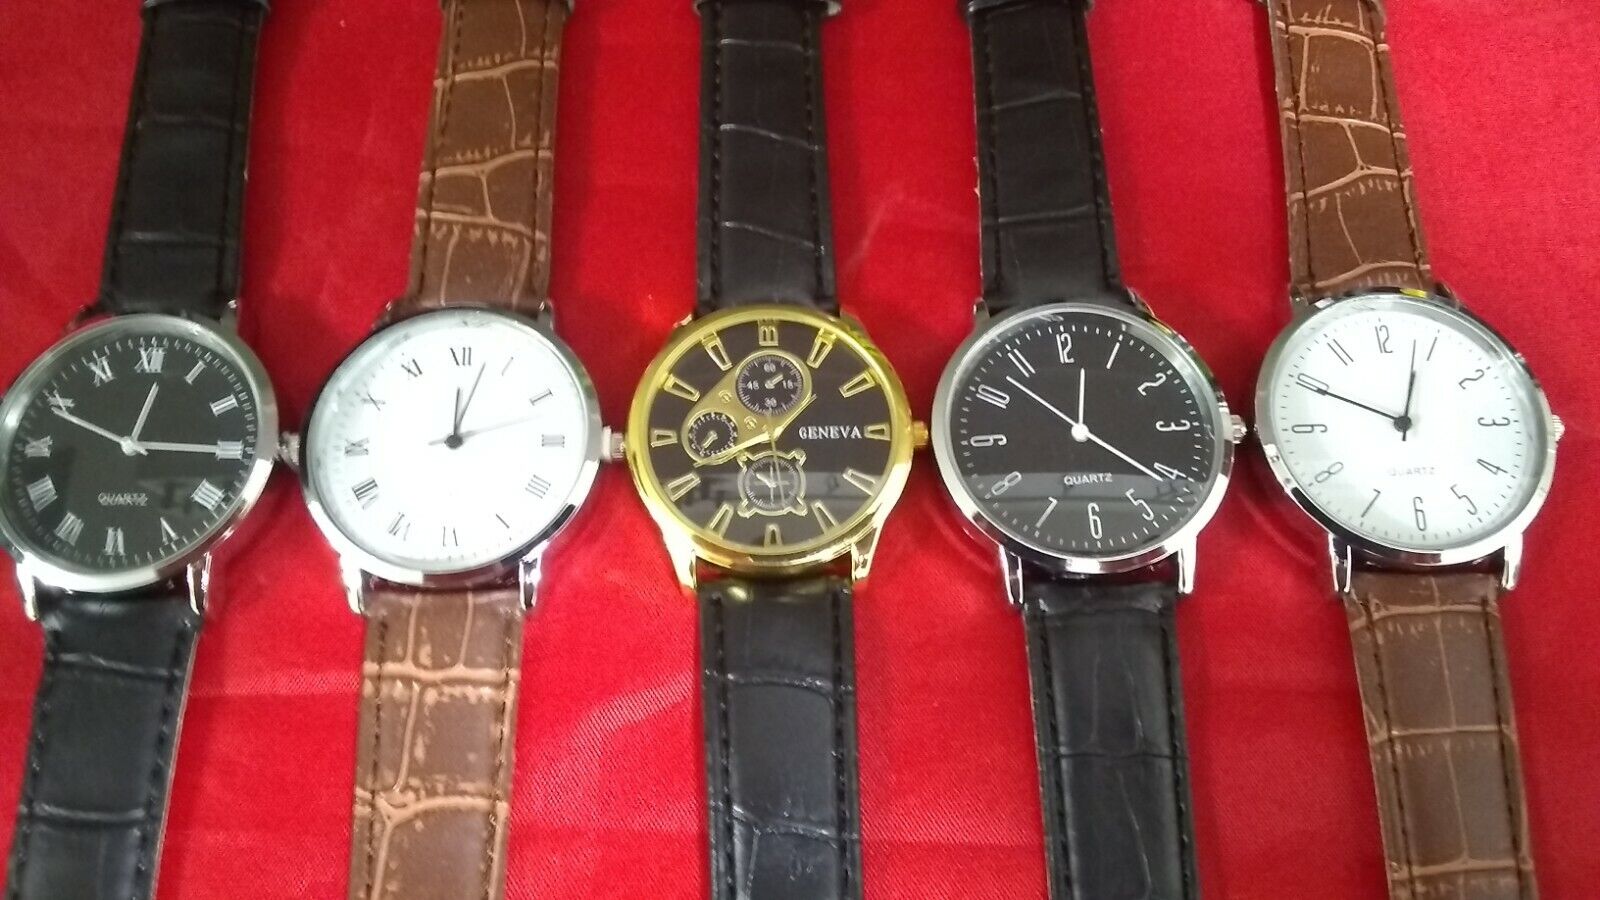 5 Brand NEW Men's Watches 10 FREE SPARE BATTERIES lot Watch  # 43211234 Unbranded - фотография #2